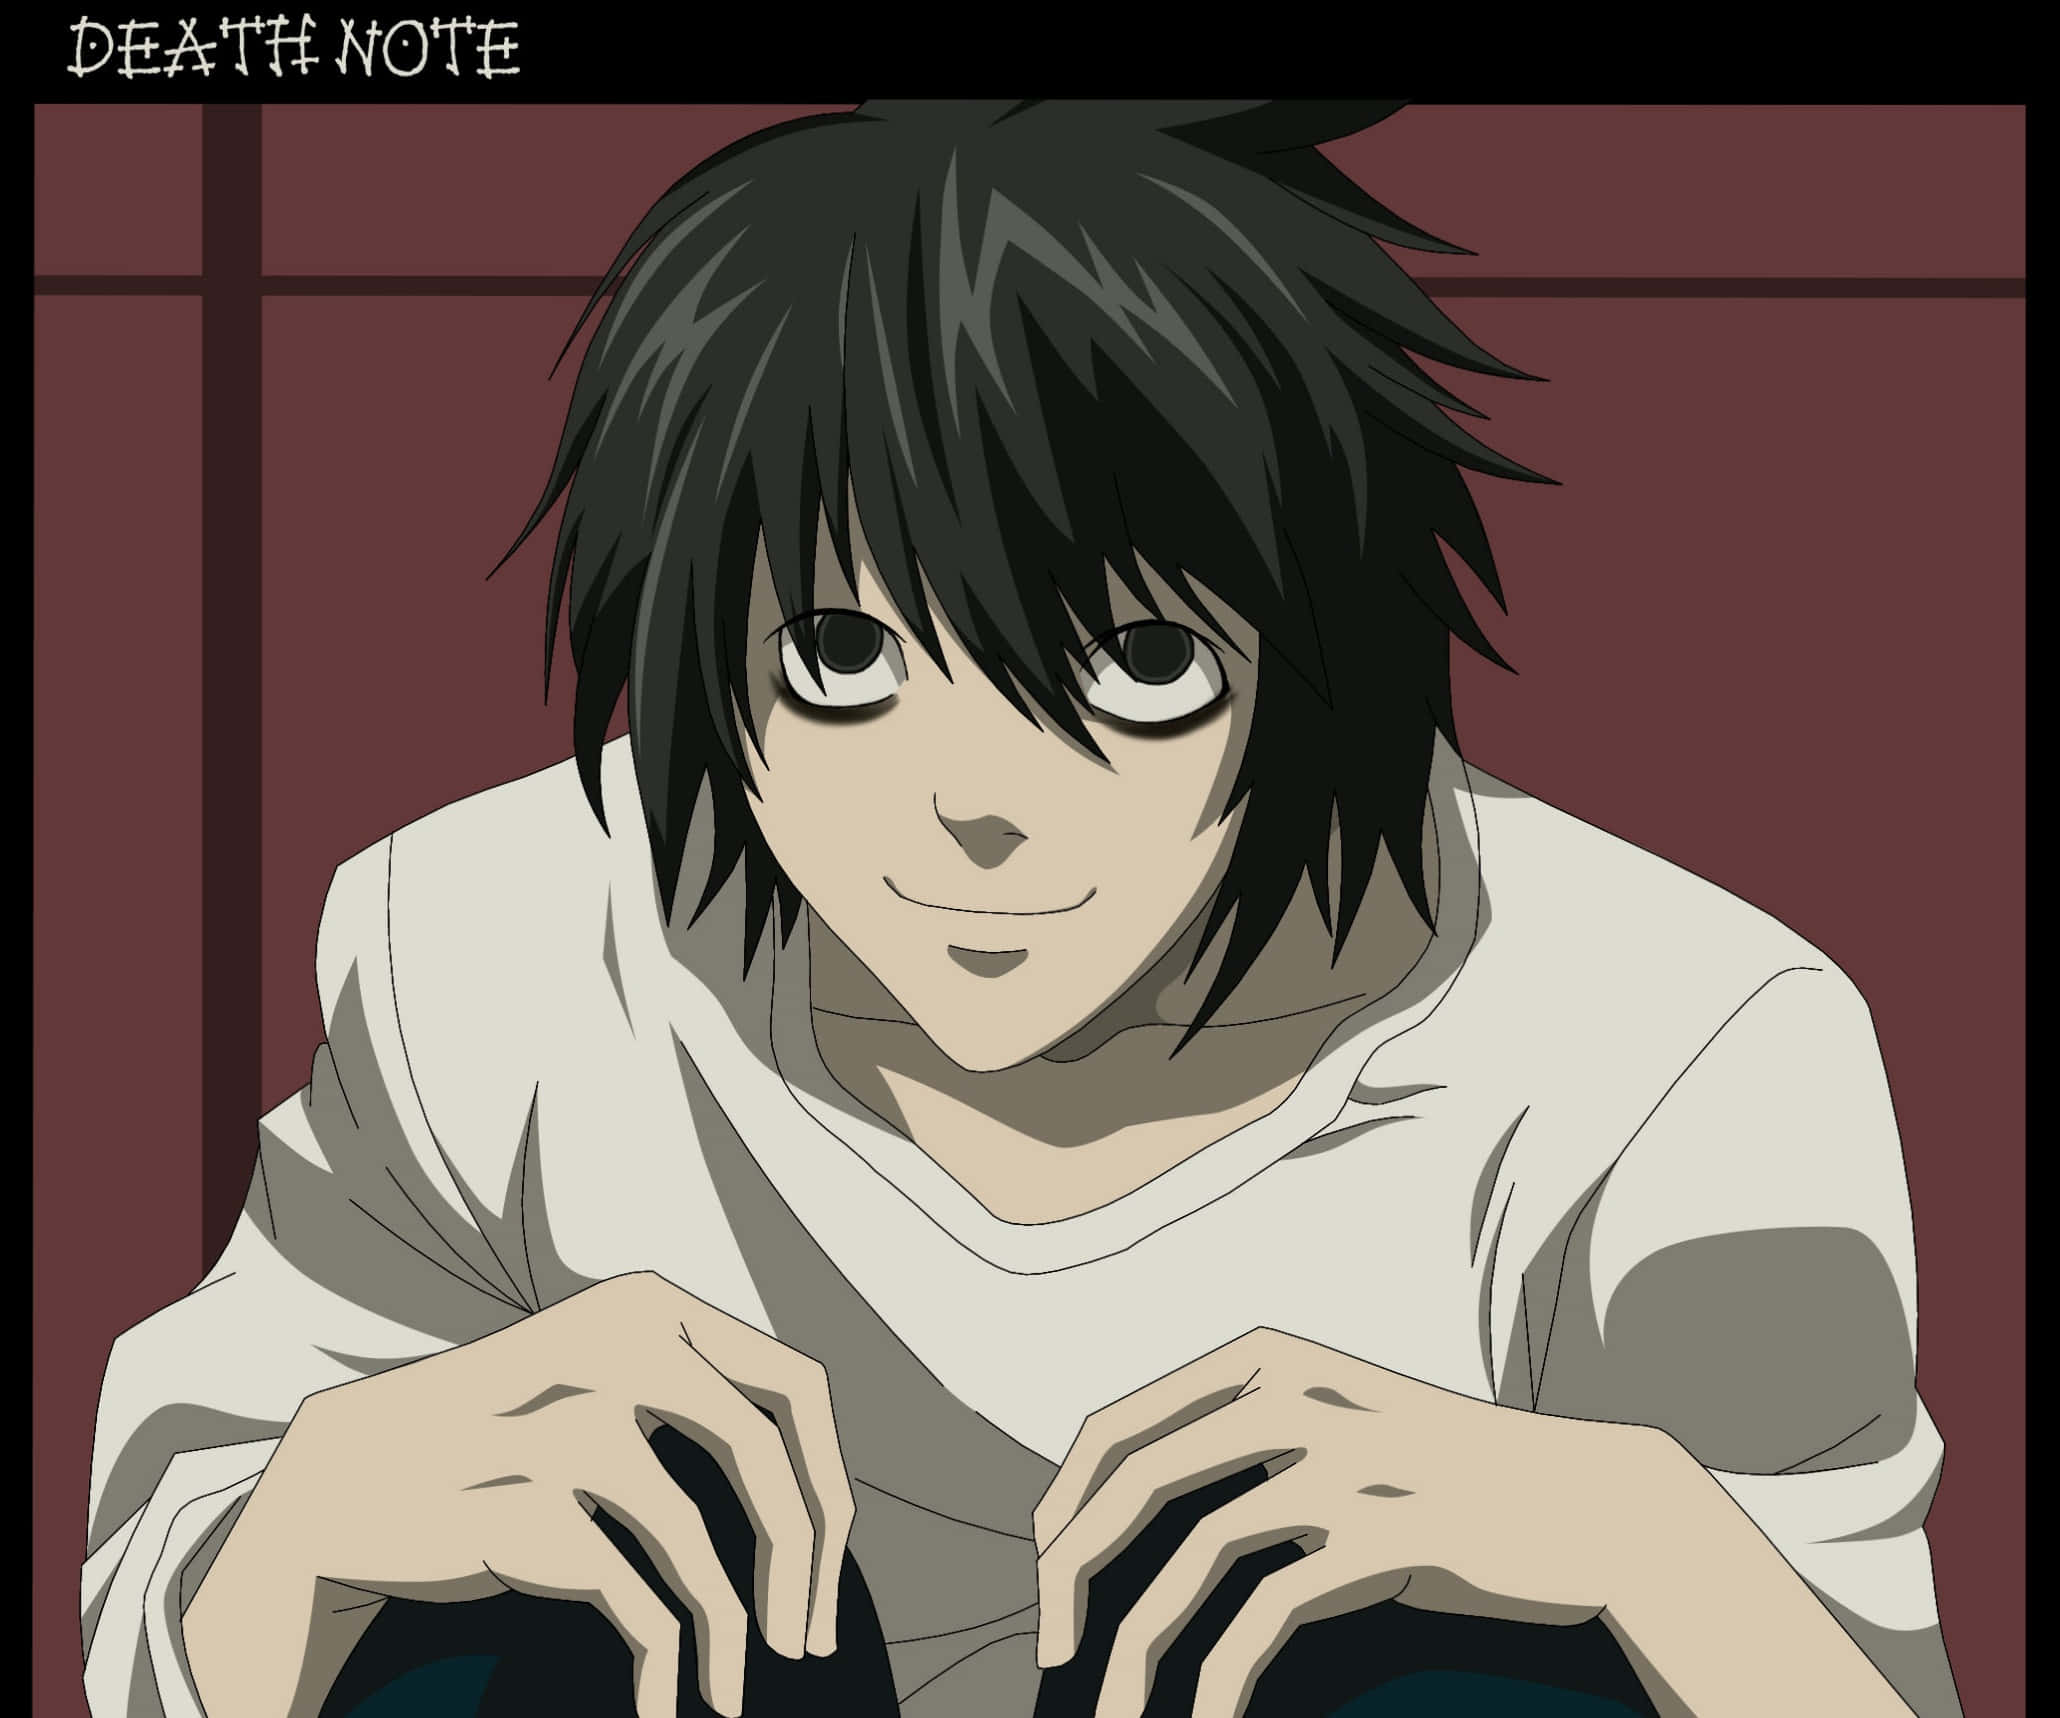 "The power of life and death lies in the Death Note"